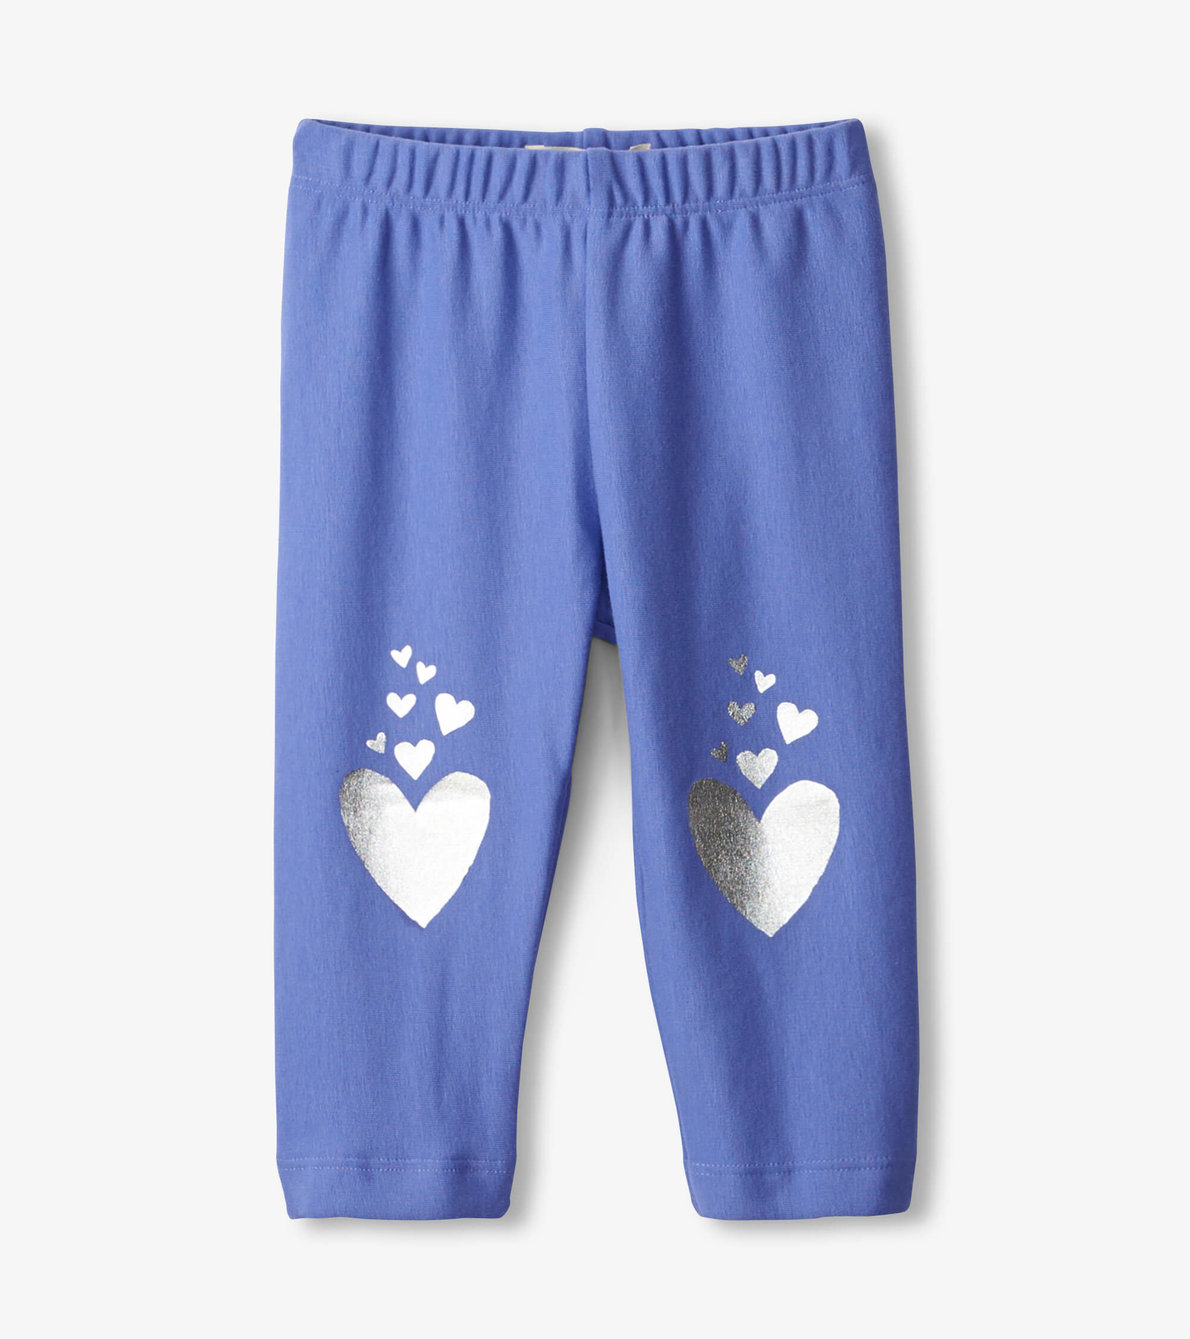 View larger image of Hearts Cozy Baby Leggings